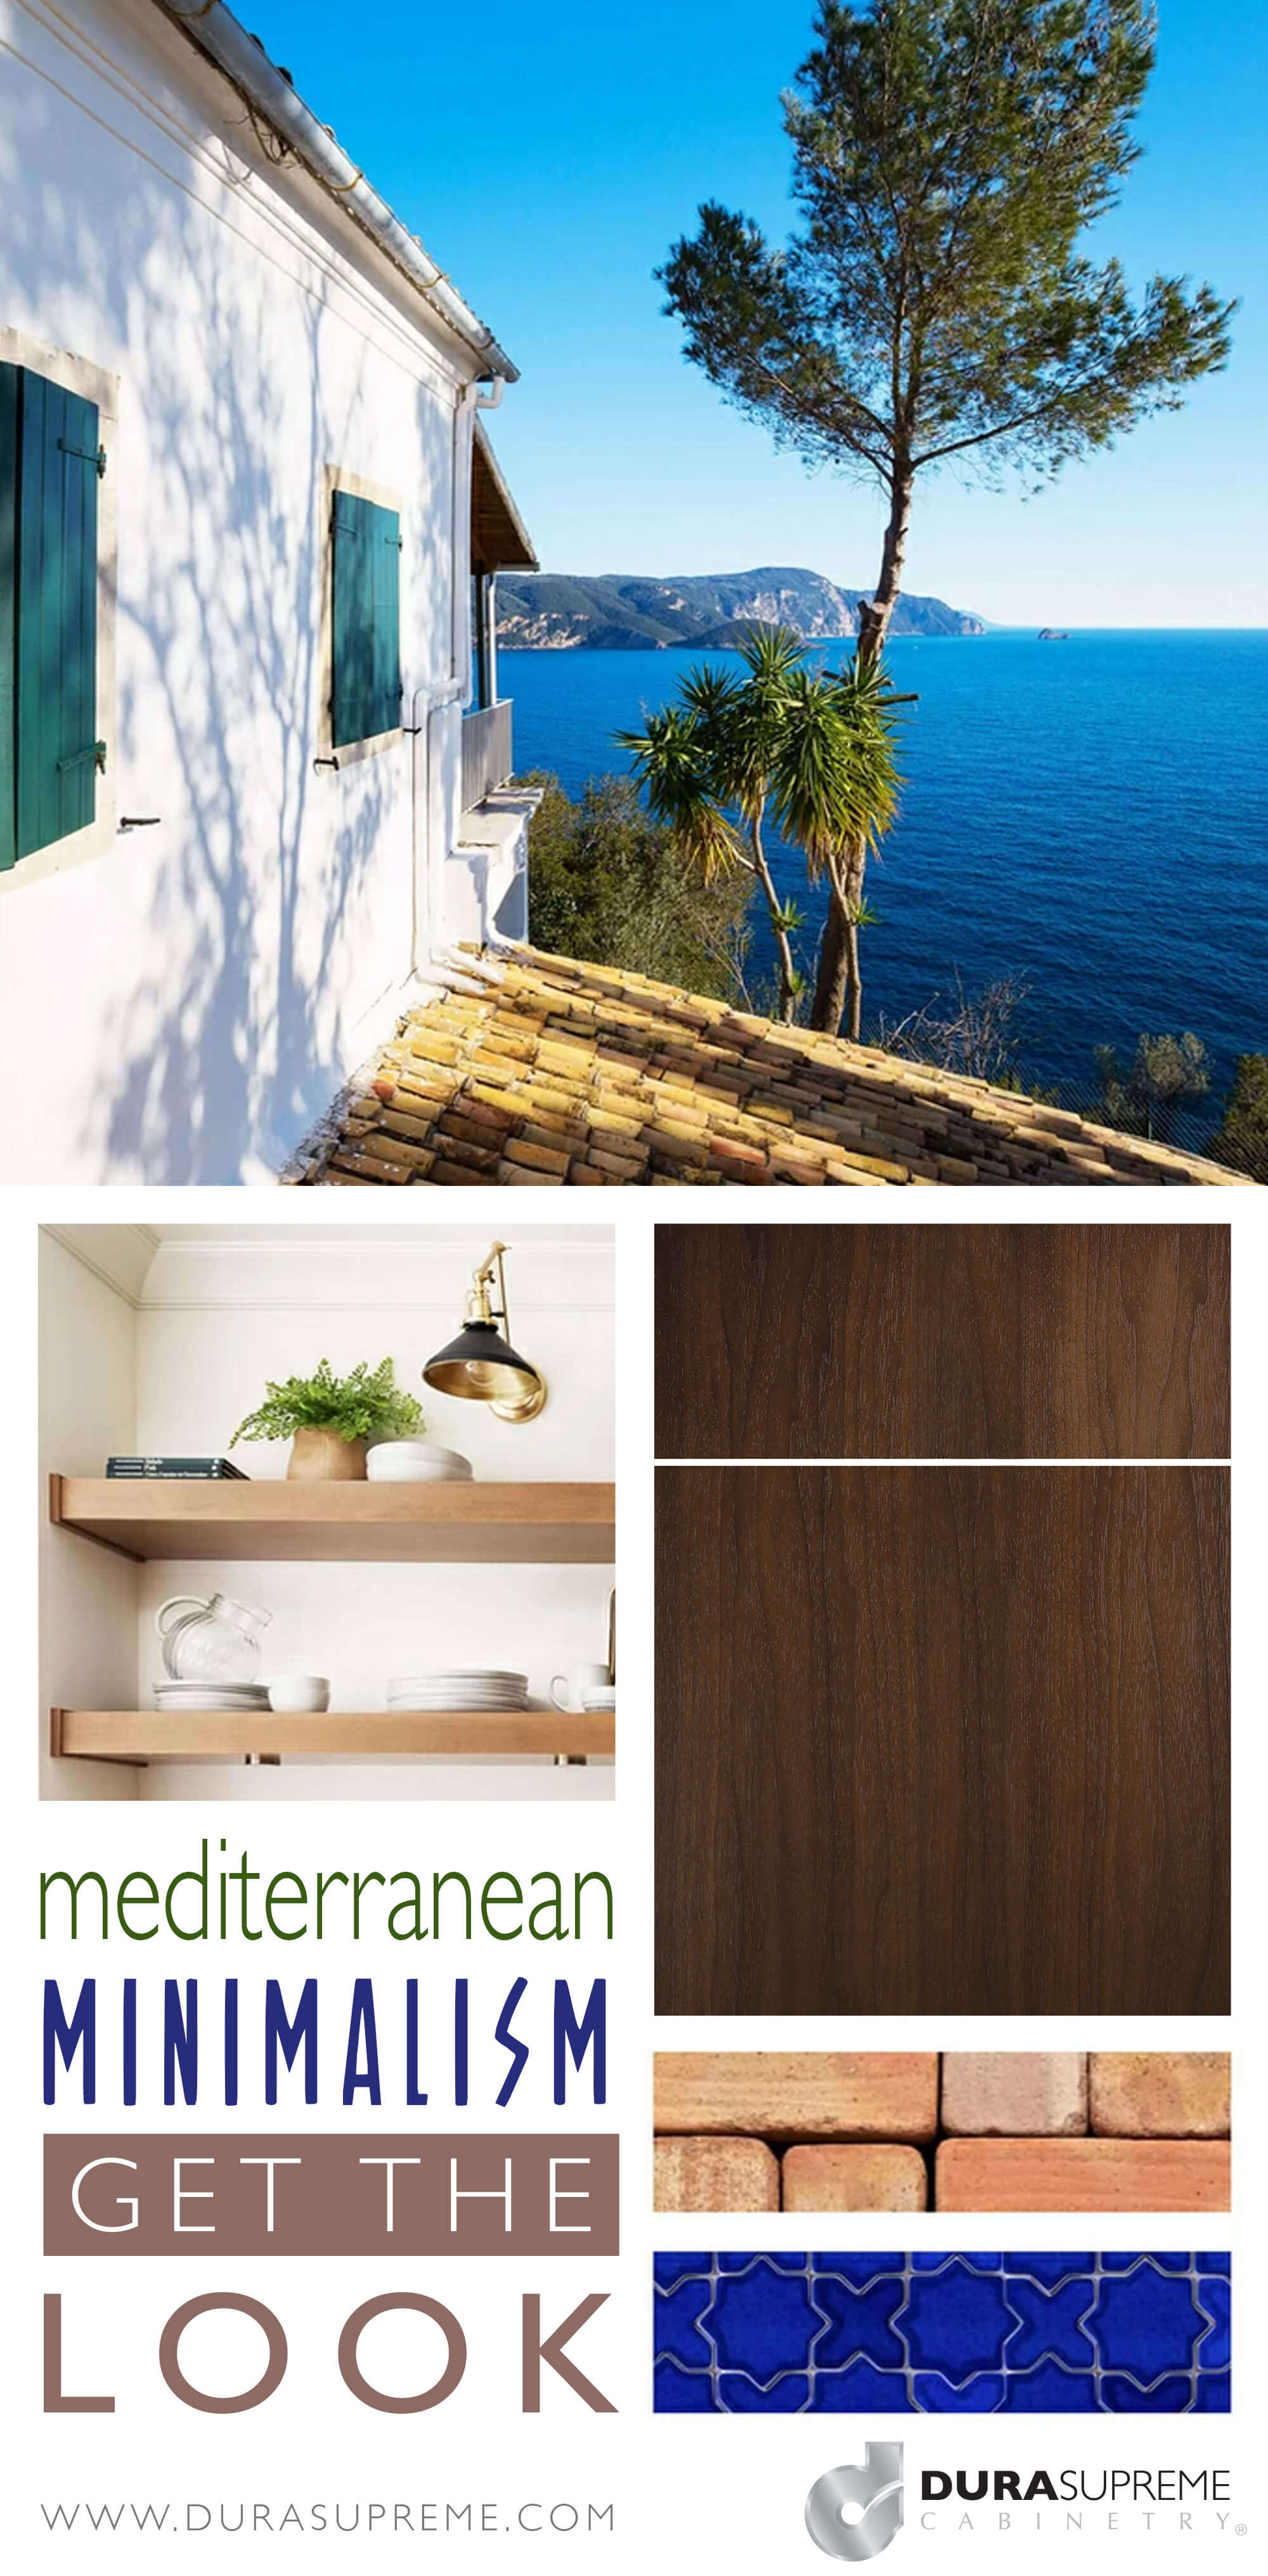 GEt the look of Mediterranean Minimalism Style in a kitchen or bathroom